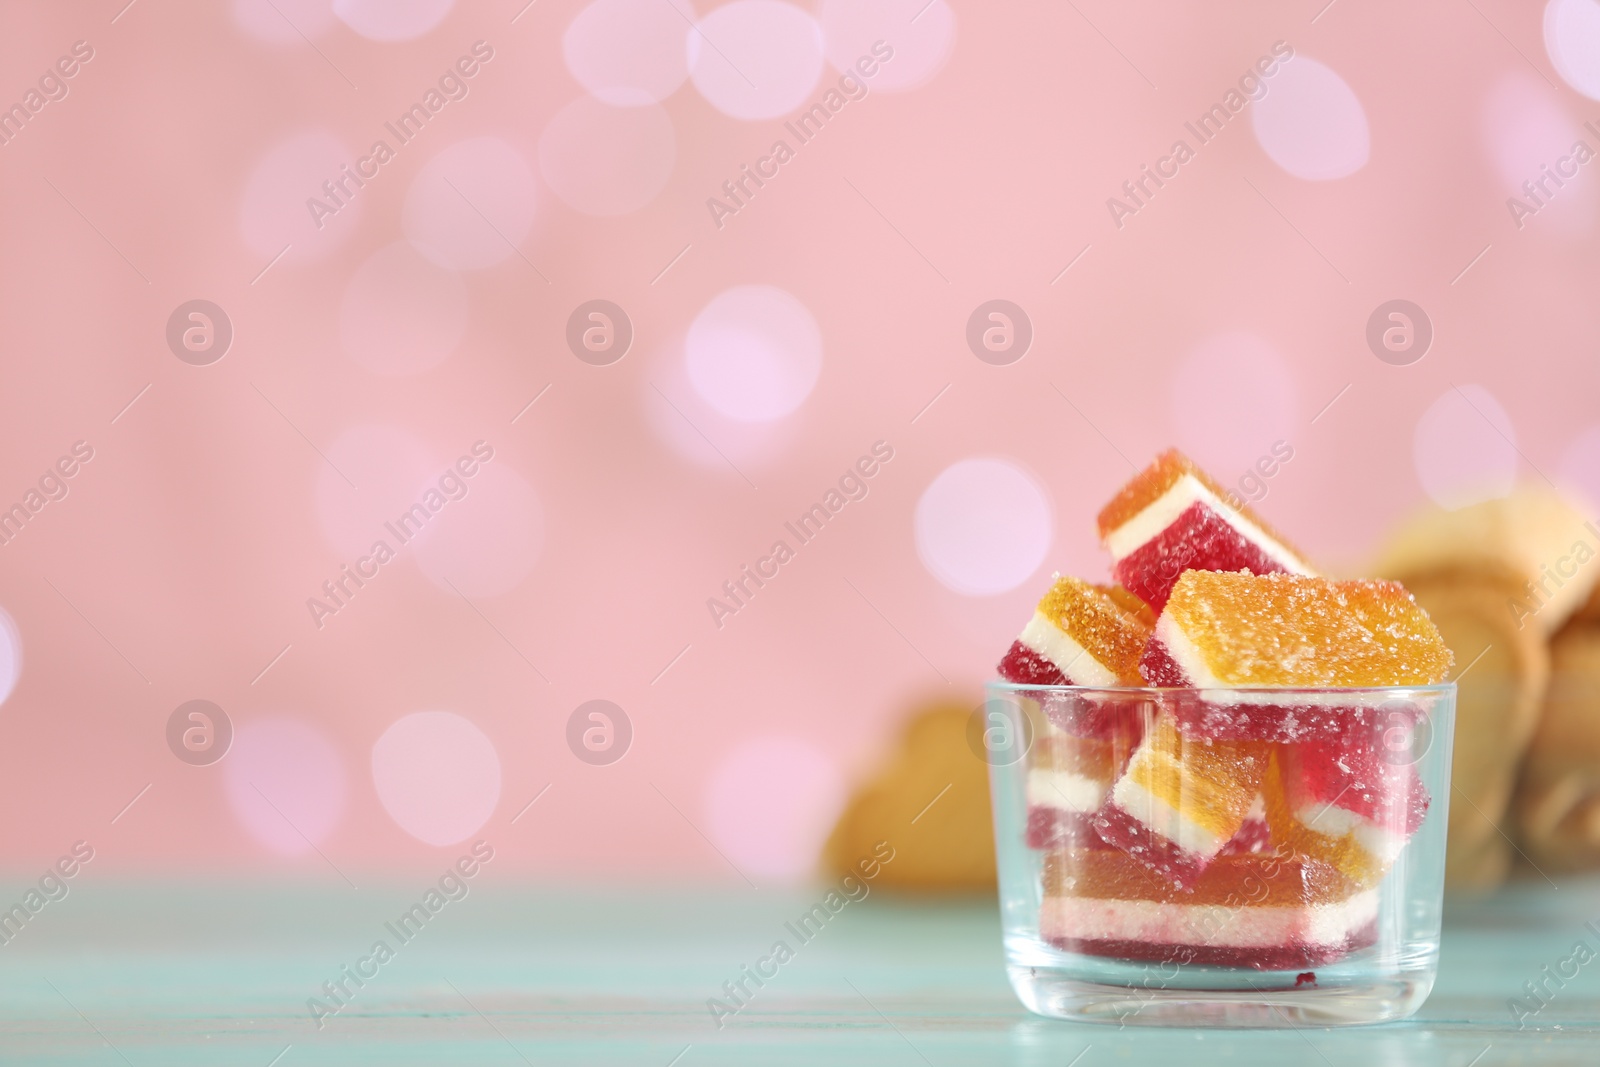 Photo of Delicious jelly candies in bowl on table against blurred background, closeup. Space for text